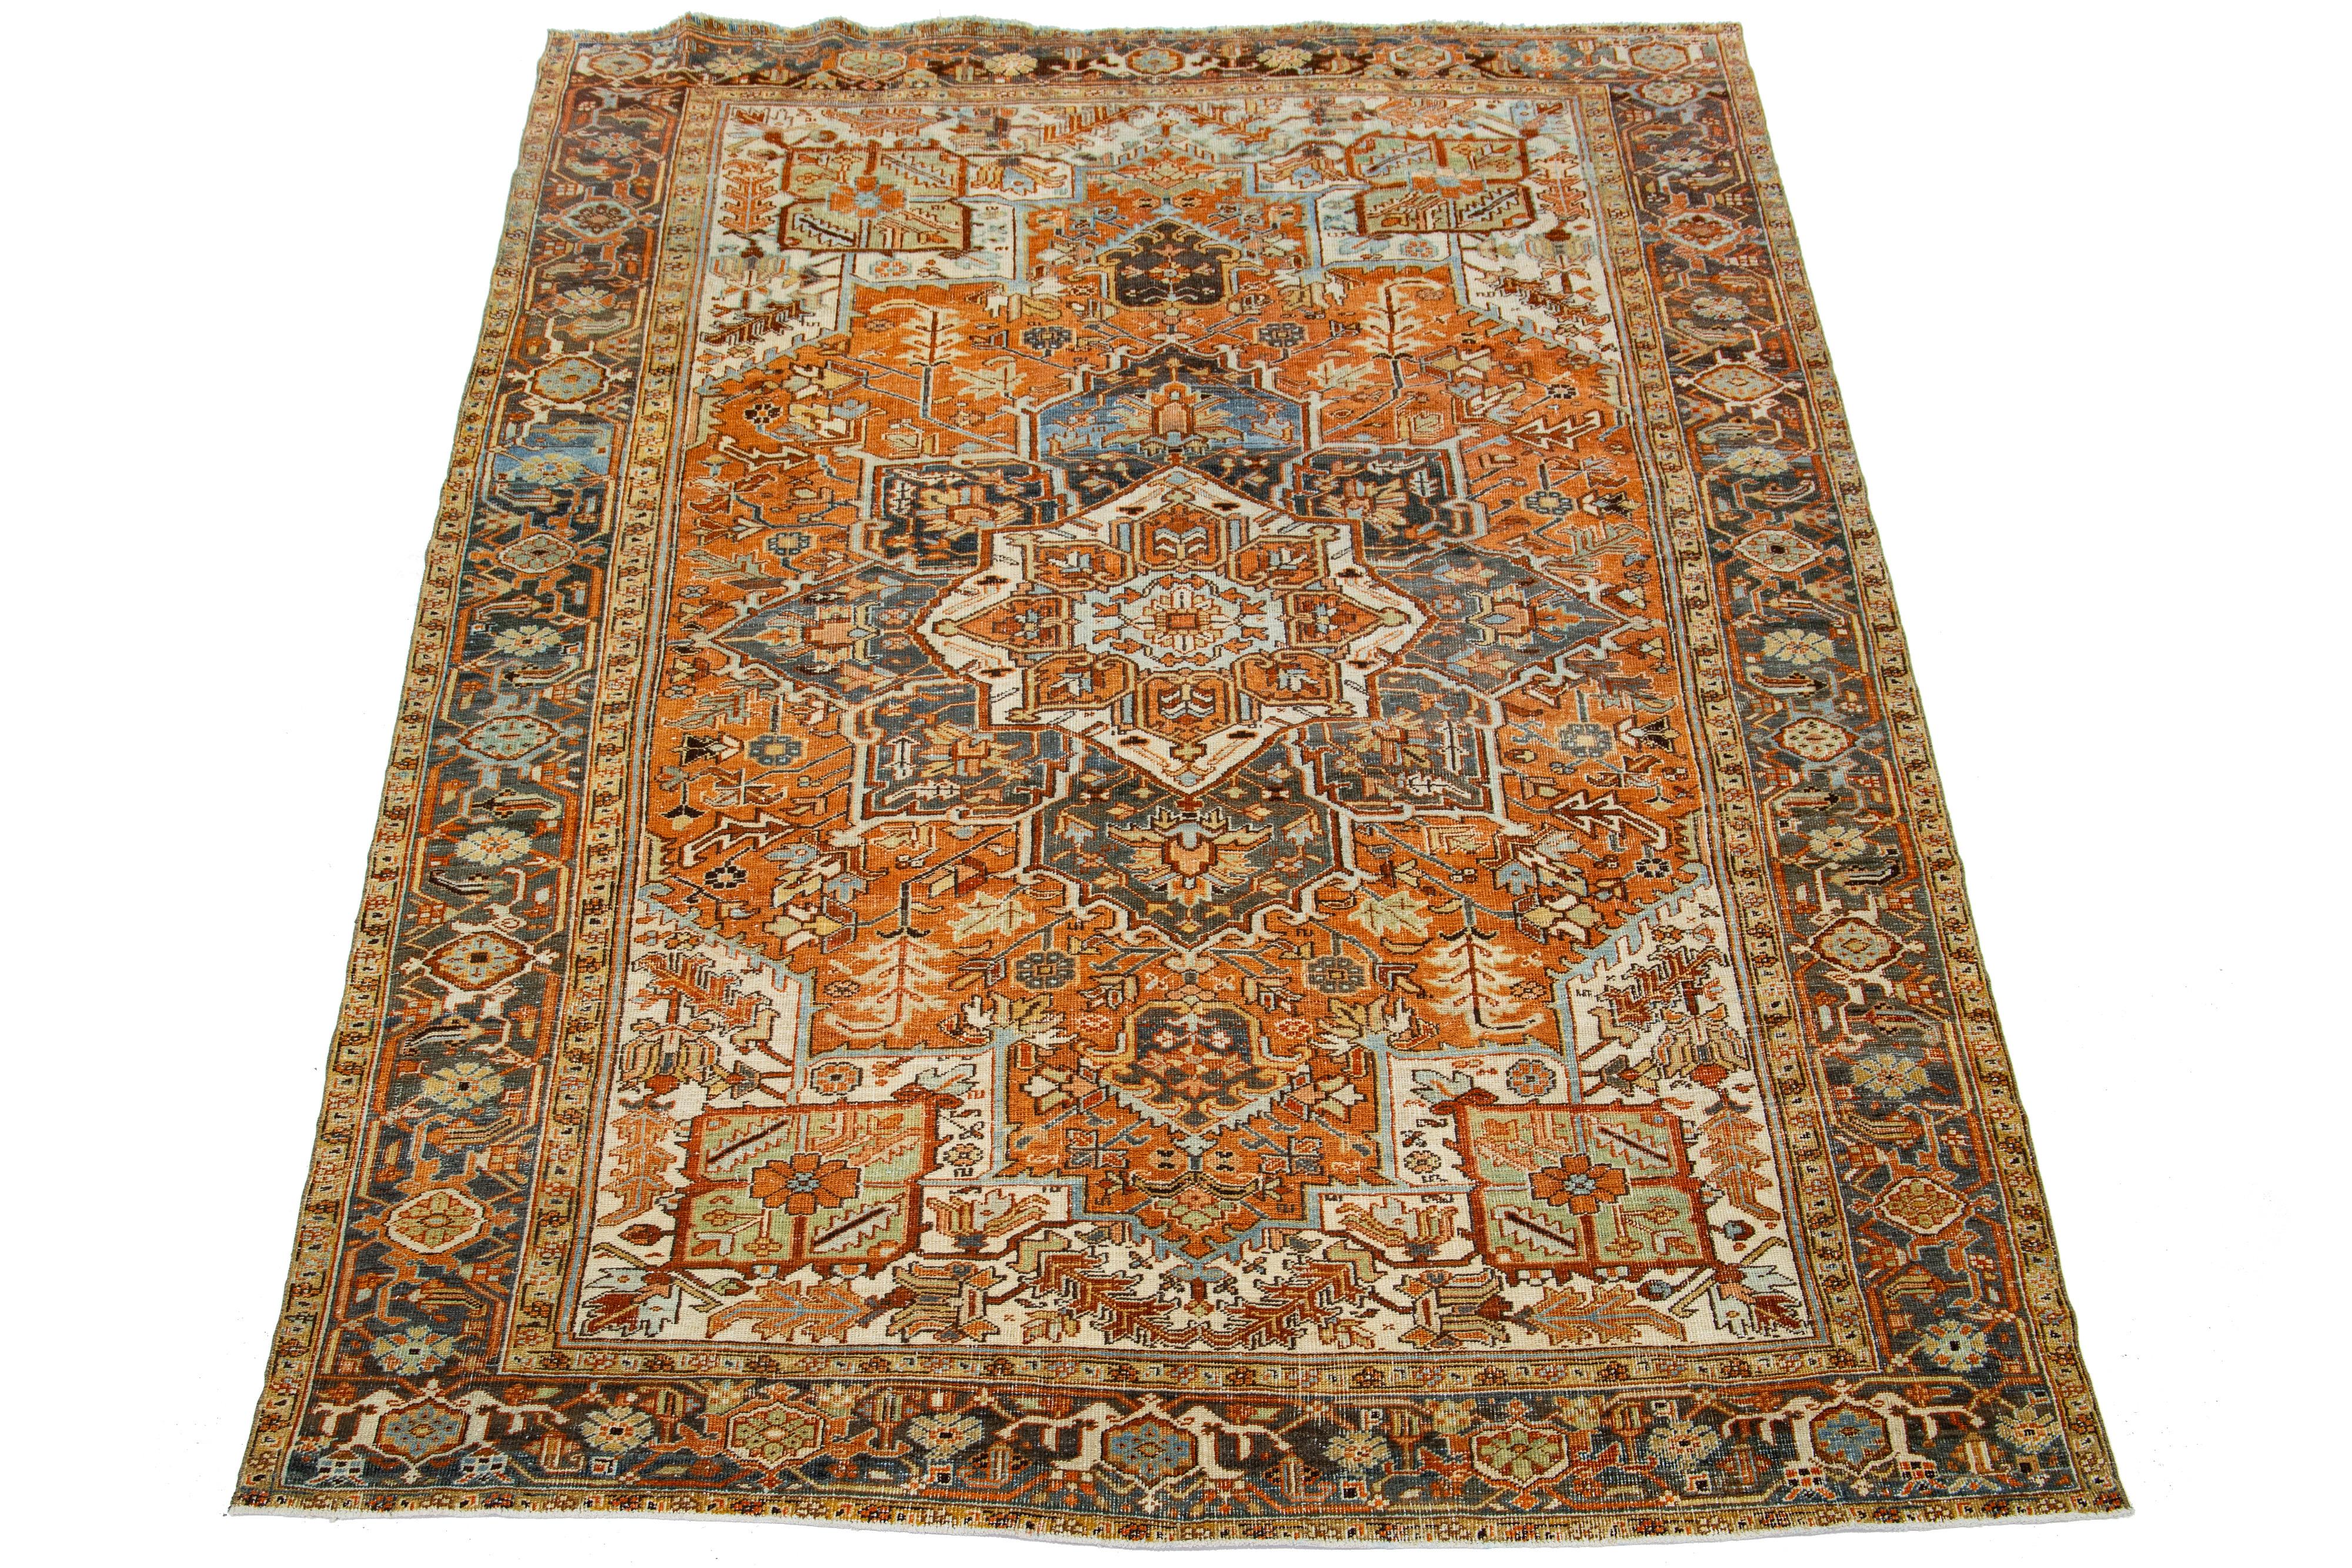 This antique Persian Heriz rug displays its impressive medallion design and hand-knotted wool construction. The orange-rust field is a backdrop for the eye-catching geometric floral pattern, adorned in shades of blue and brown.

This rug measures